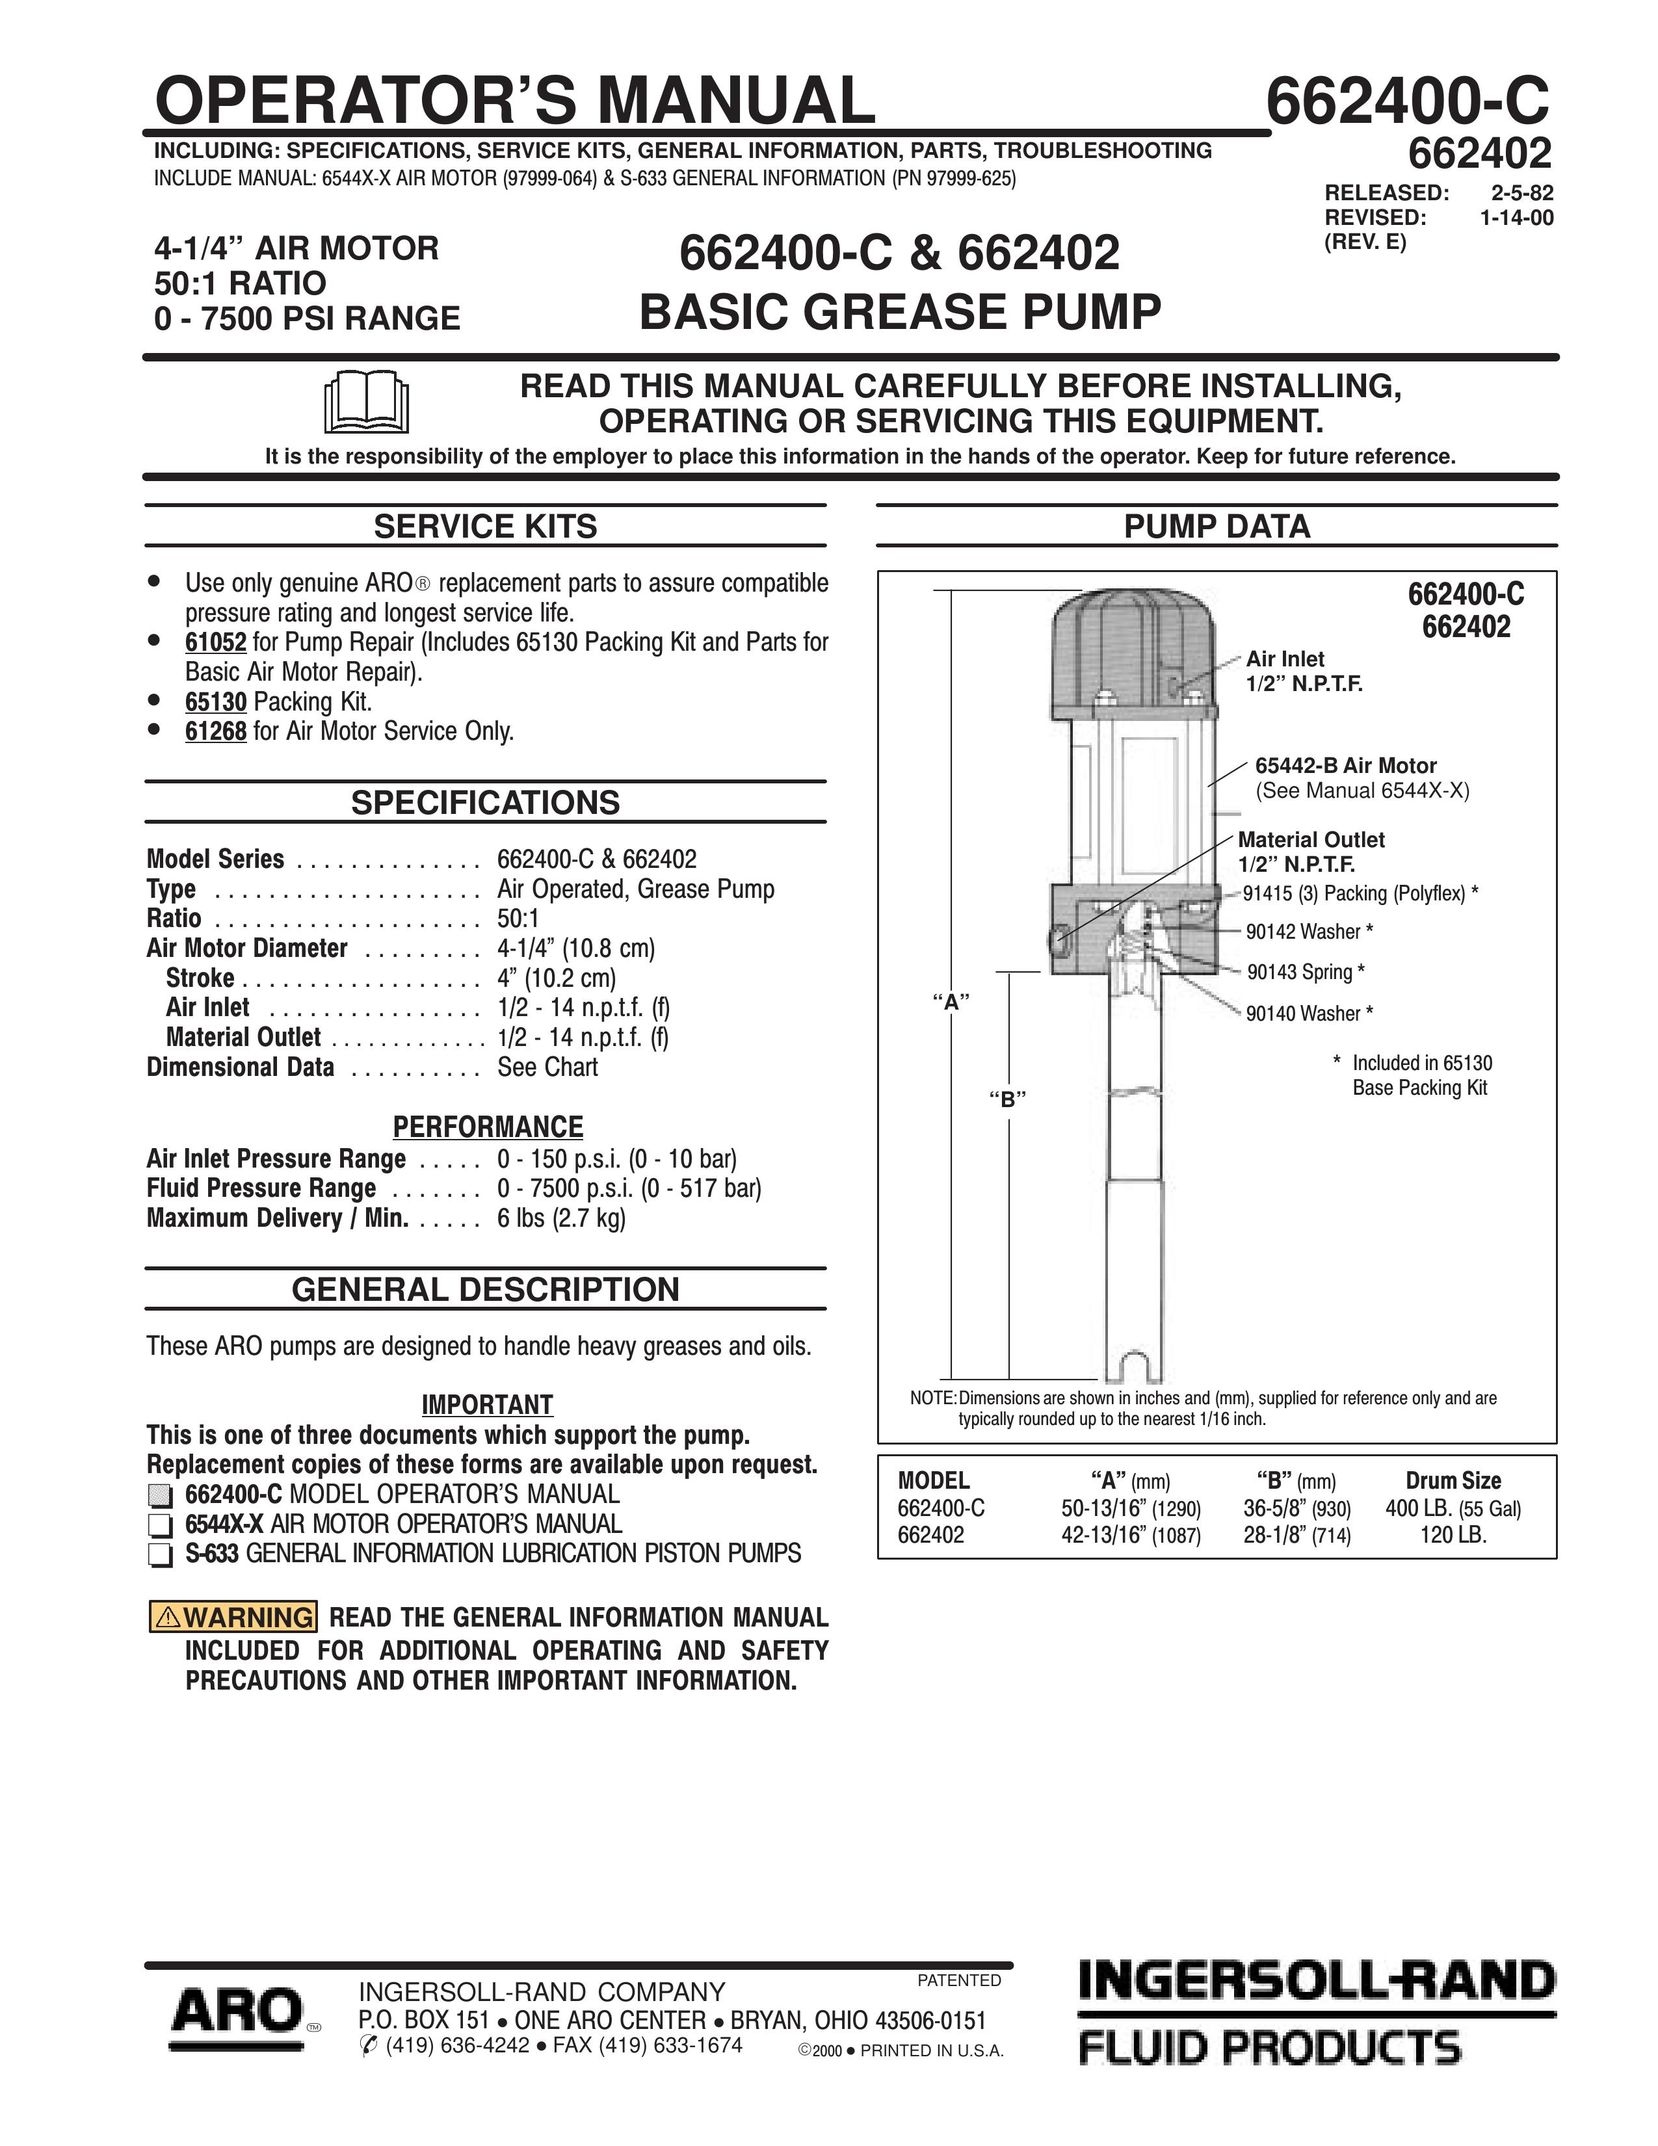 Ingersoll-Rand 662402 Septic System User Manual